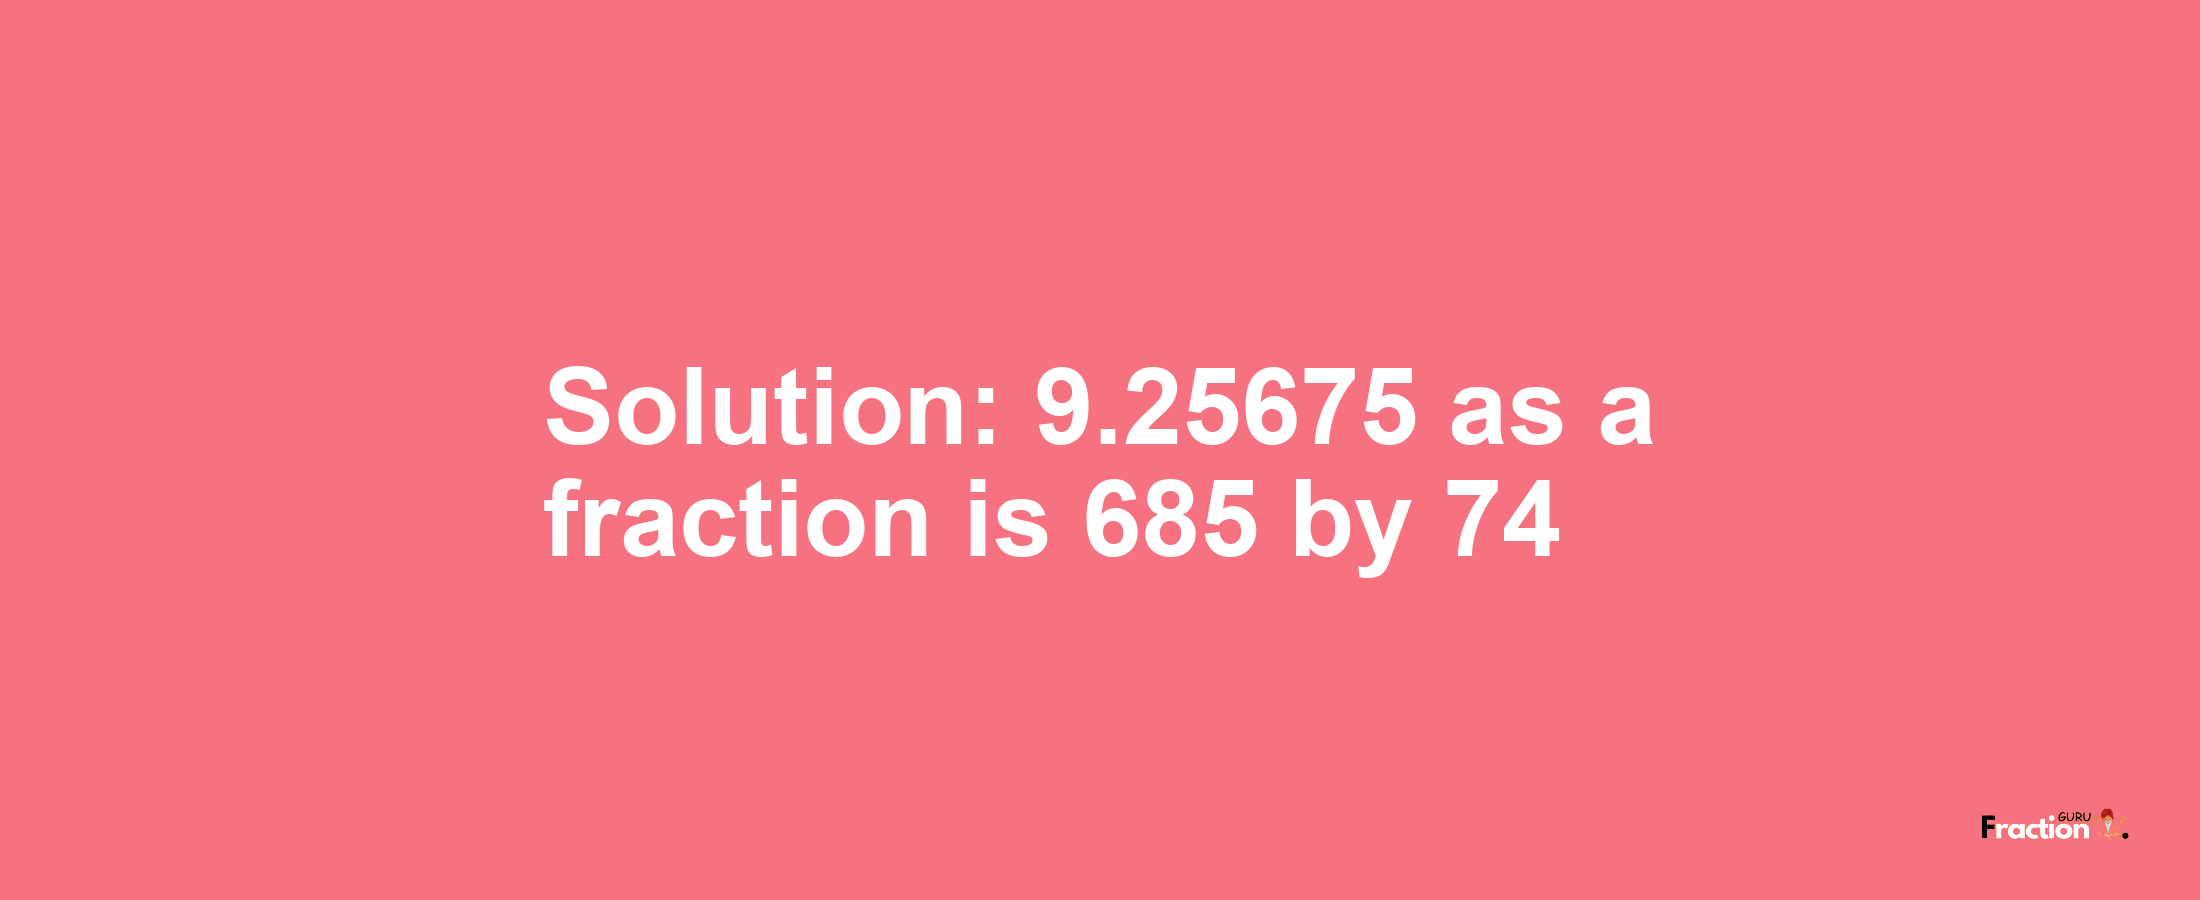 Solution:9.25675 as a fraction is 685/74